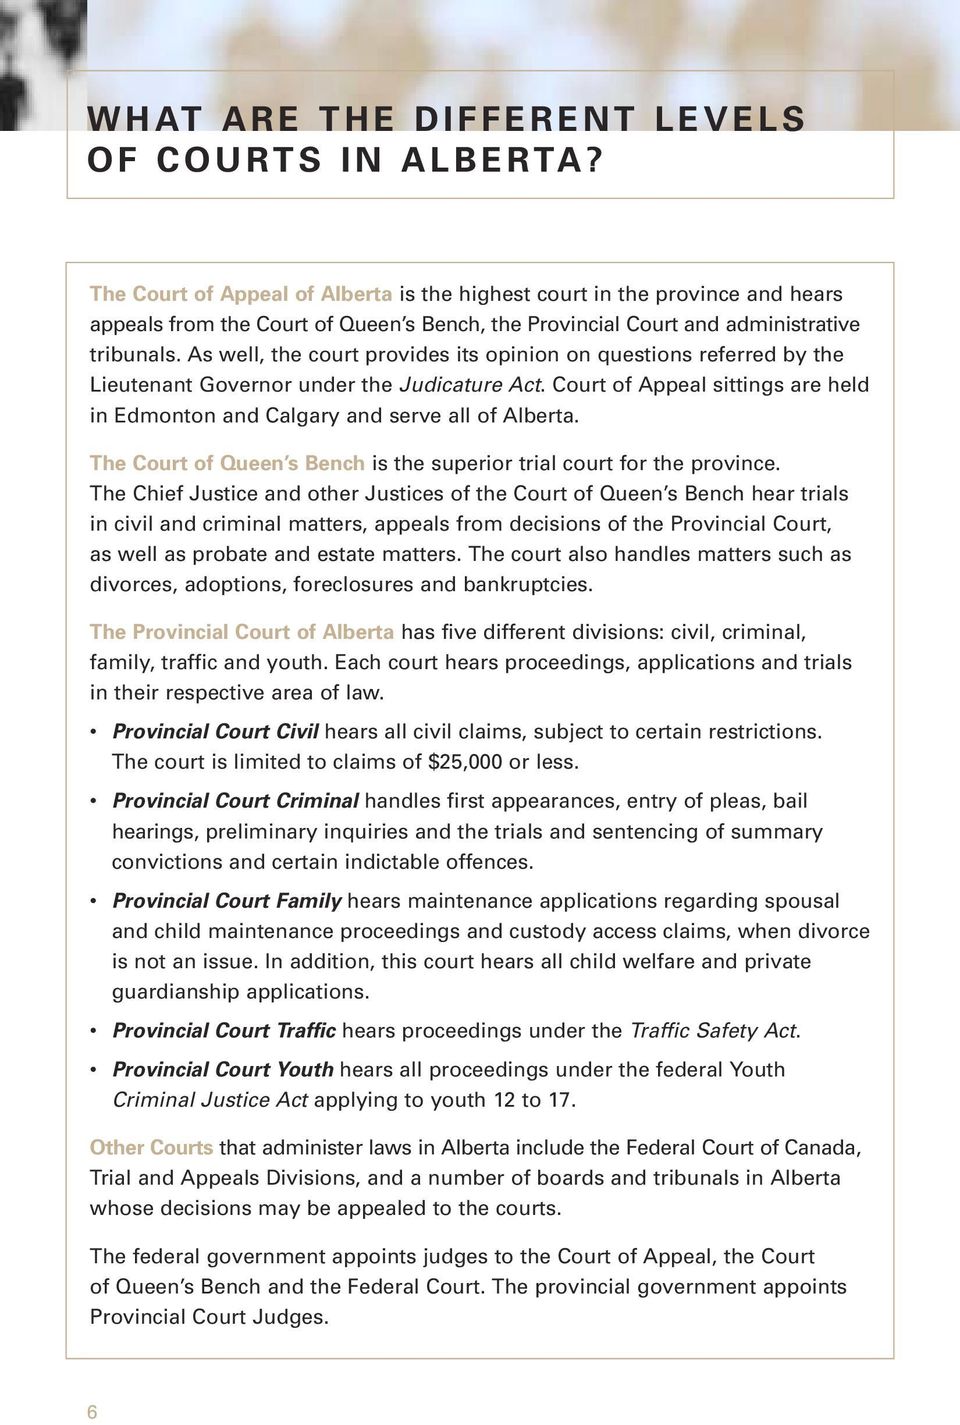 As well, the court provides its opinion on questions referred by the Lieutenant Governor under the Judicature Act. Court of Appeal sittings are held in Edmonton and Calgary and serve all of Alberta.